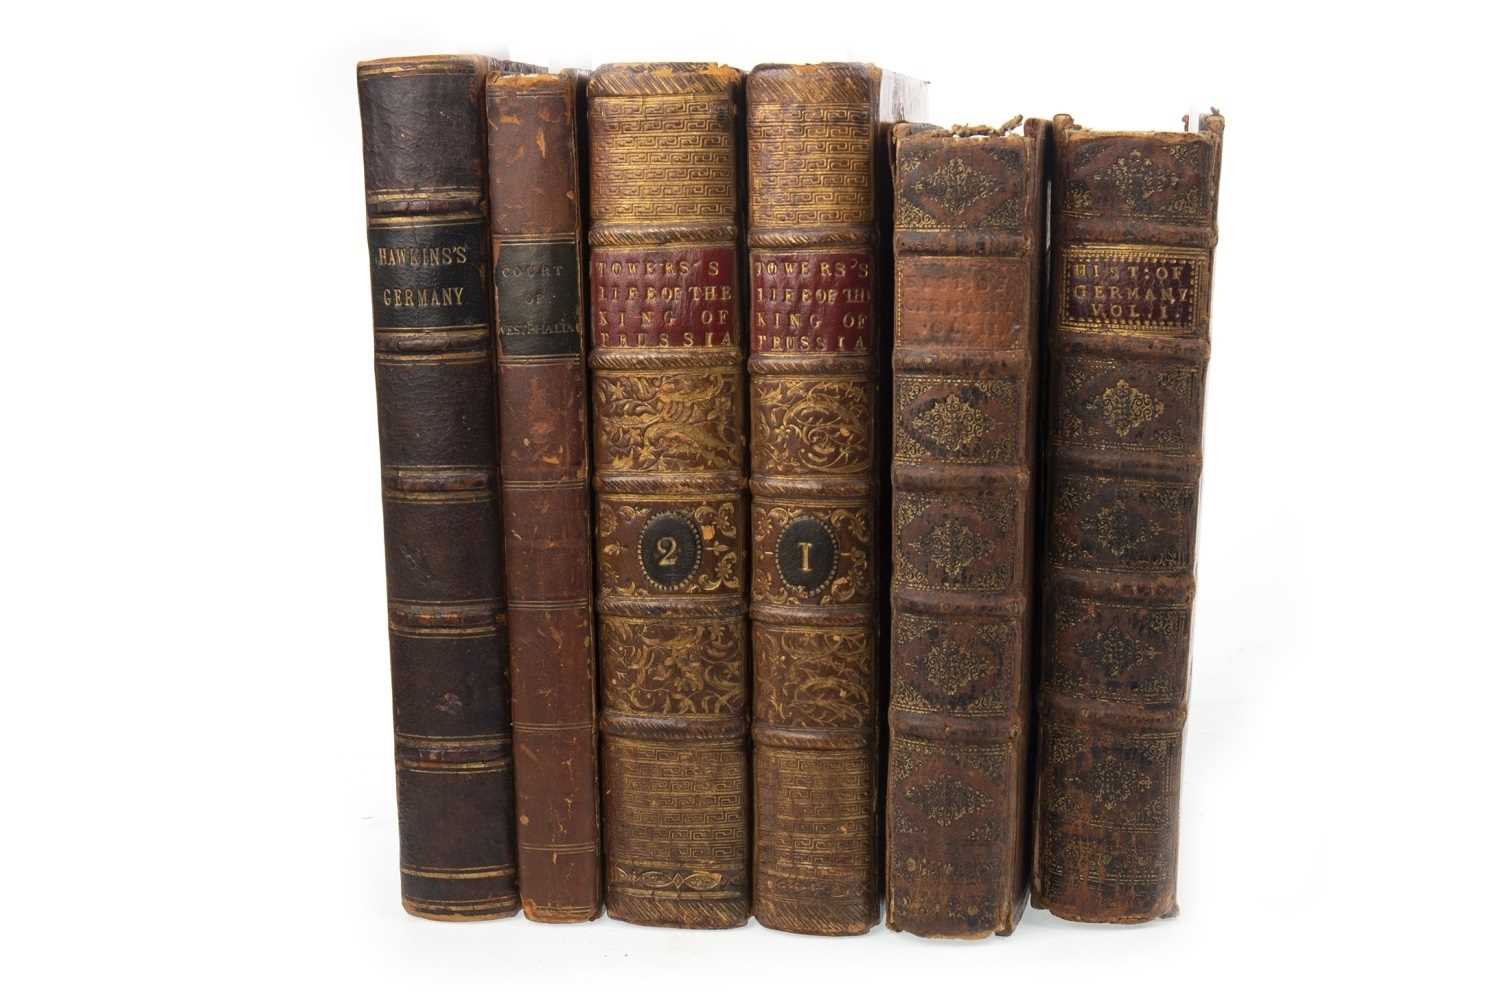 Lot 1597 - A COMPLEAT HISTORY OF GERMANY, BY JOHN SAVAGE